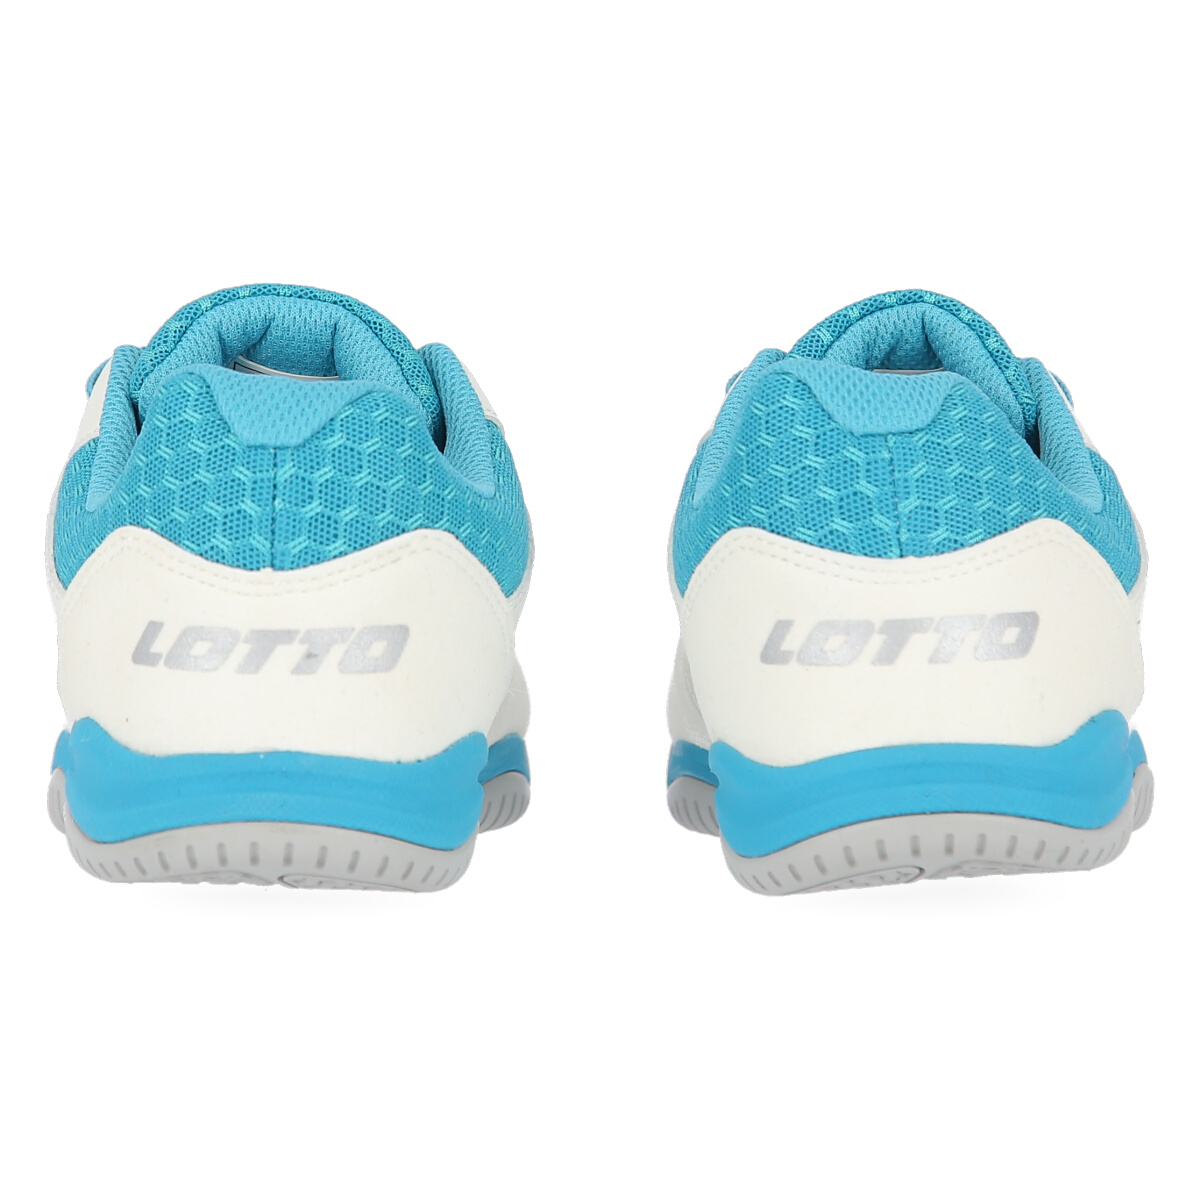 Botines Lotto Tacto 300 Iv Id,  image number null